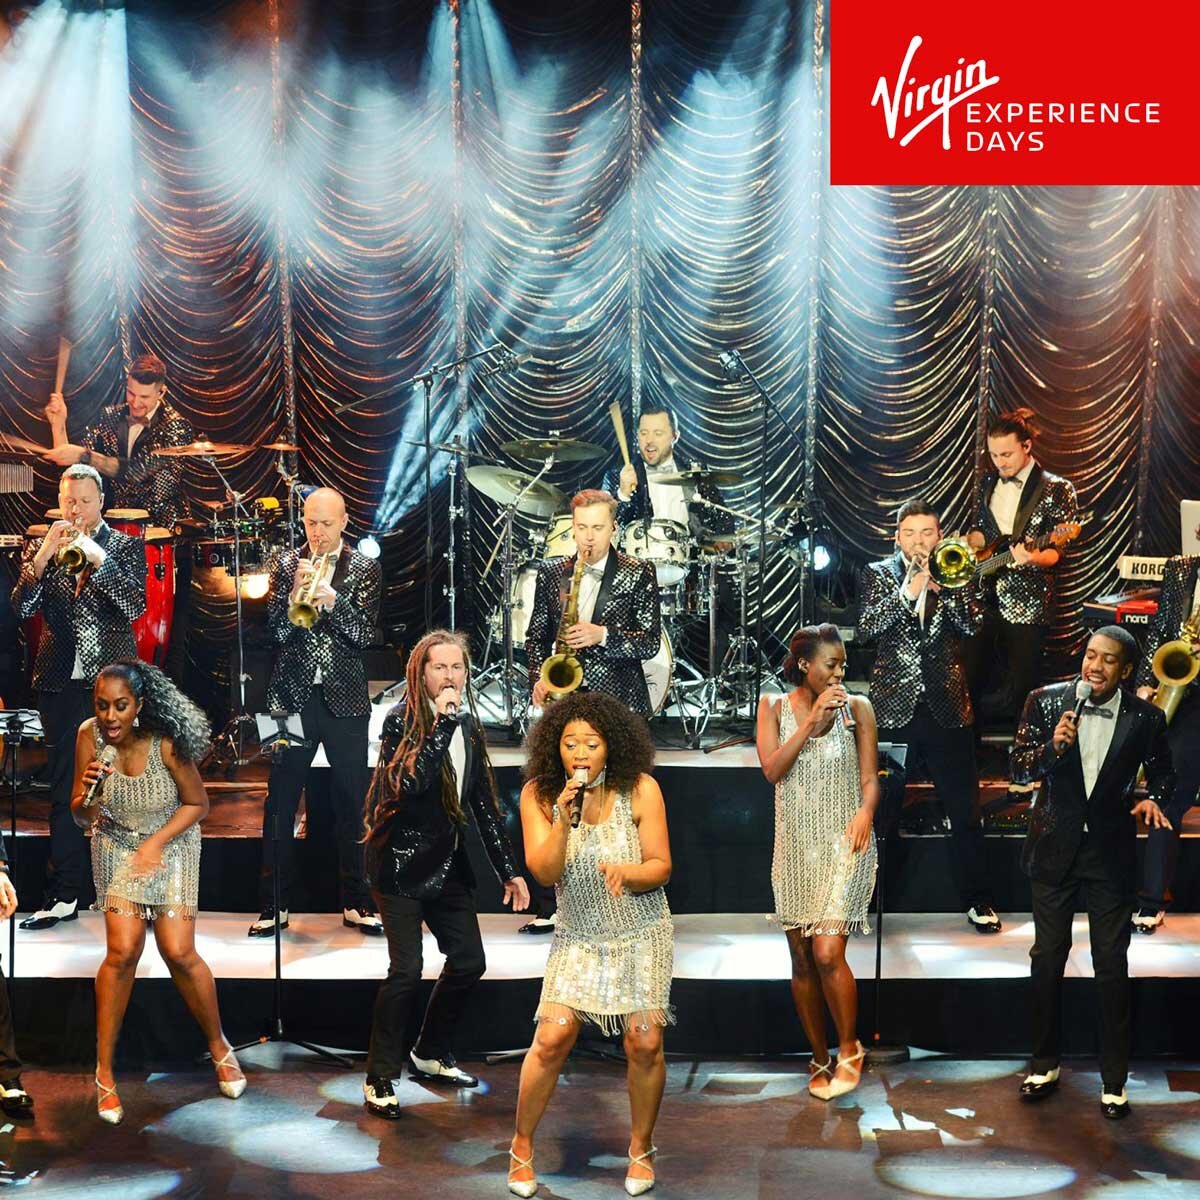 Virgin Experience Days Motown Supper Immersive Dining and Live Show for Two